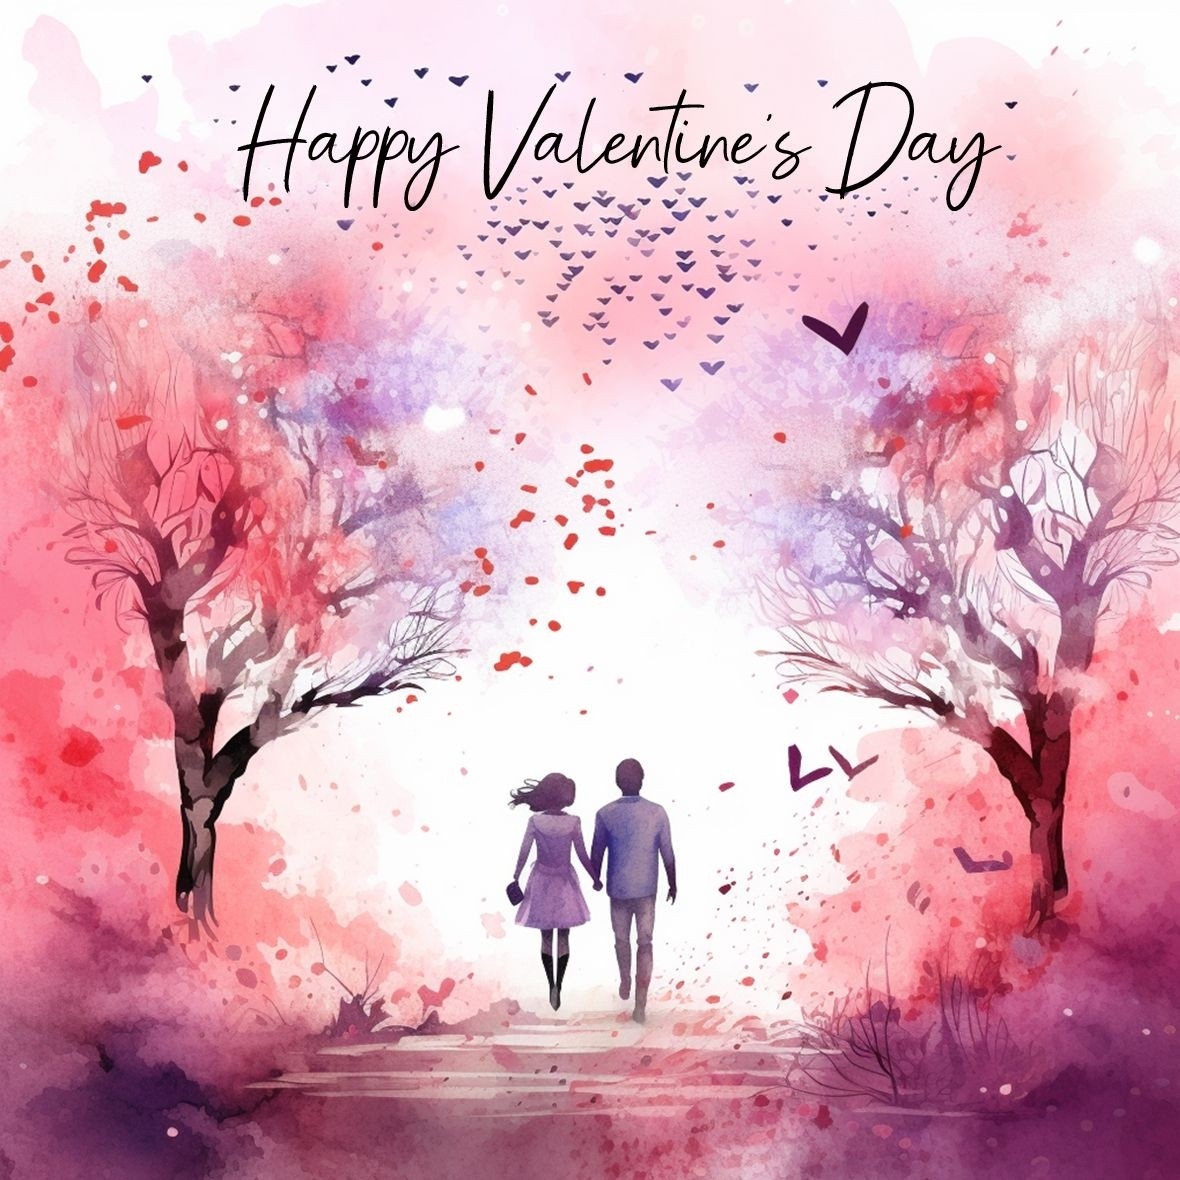 Valentines Day Square Greeting Card (Design 1)